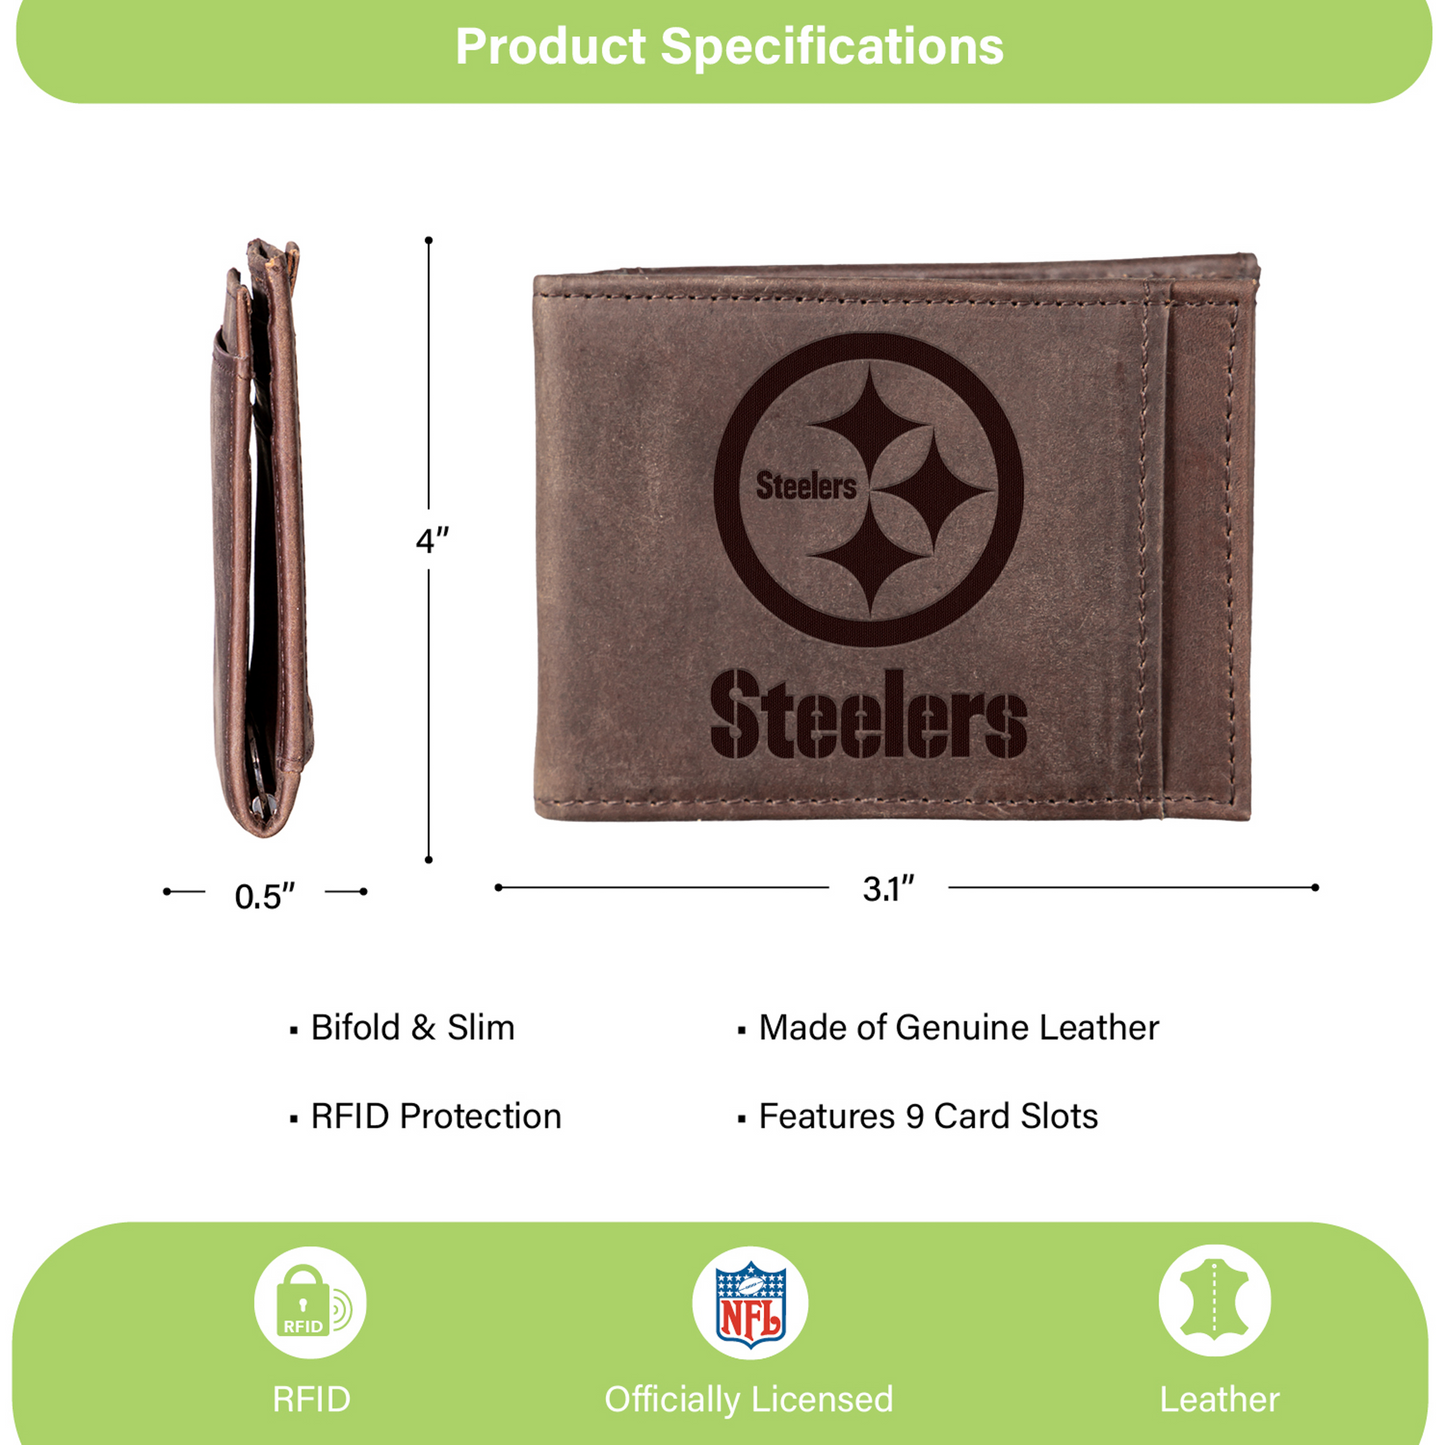 PITTSBURGH STEELERS FRONT POCKET SLIM CARD HOLDER WITH RFID BLOCKING